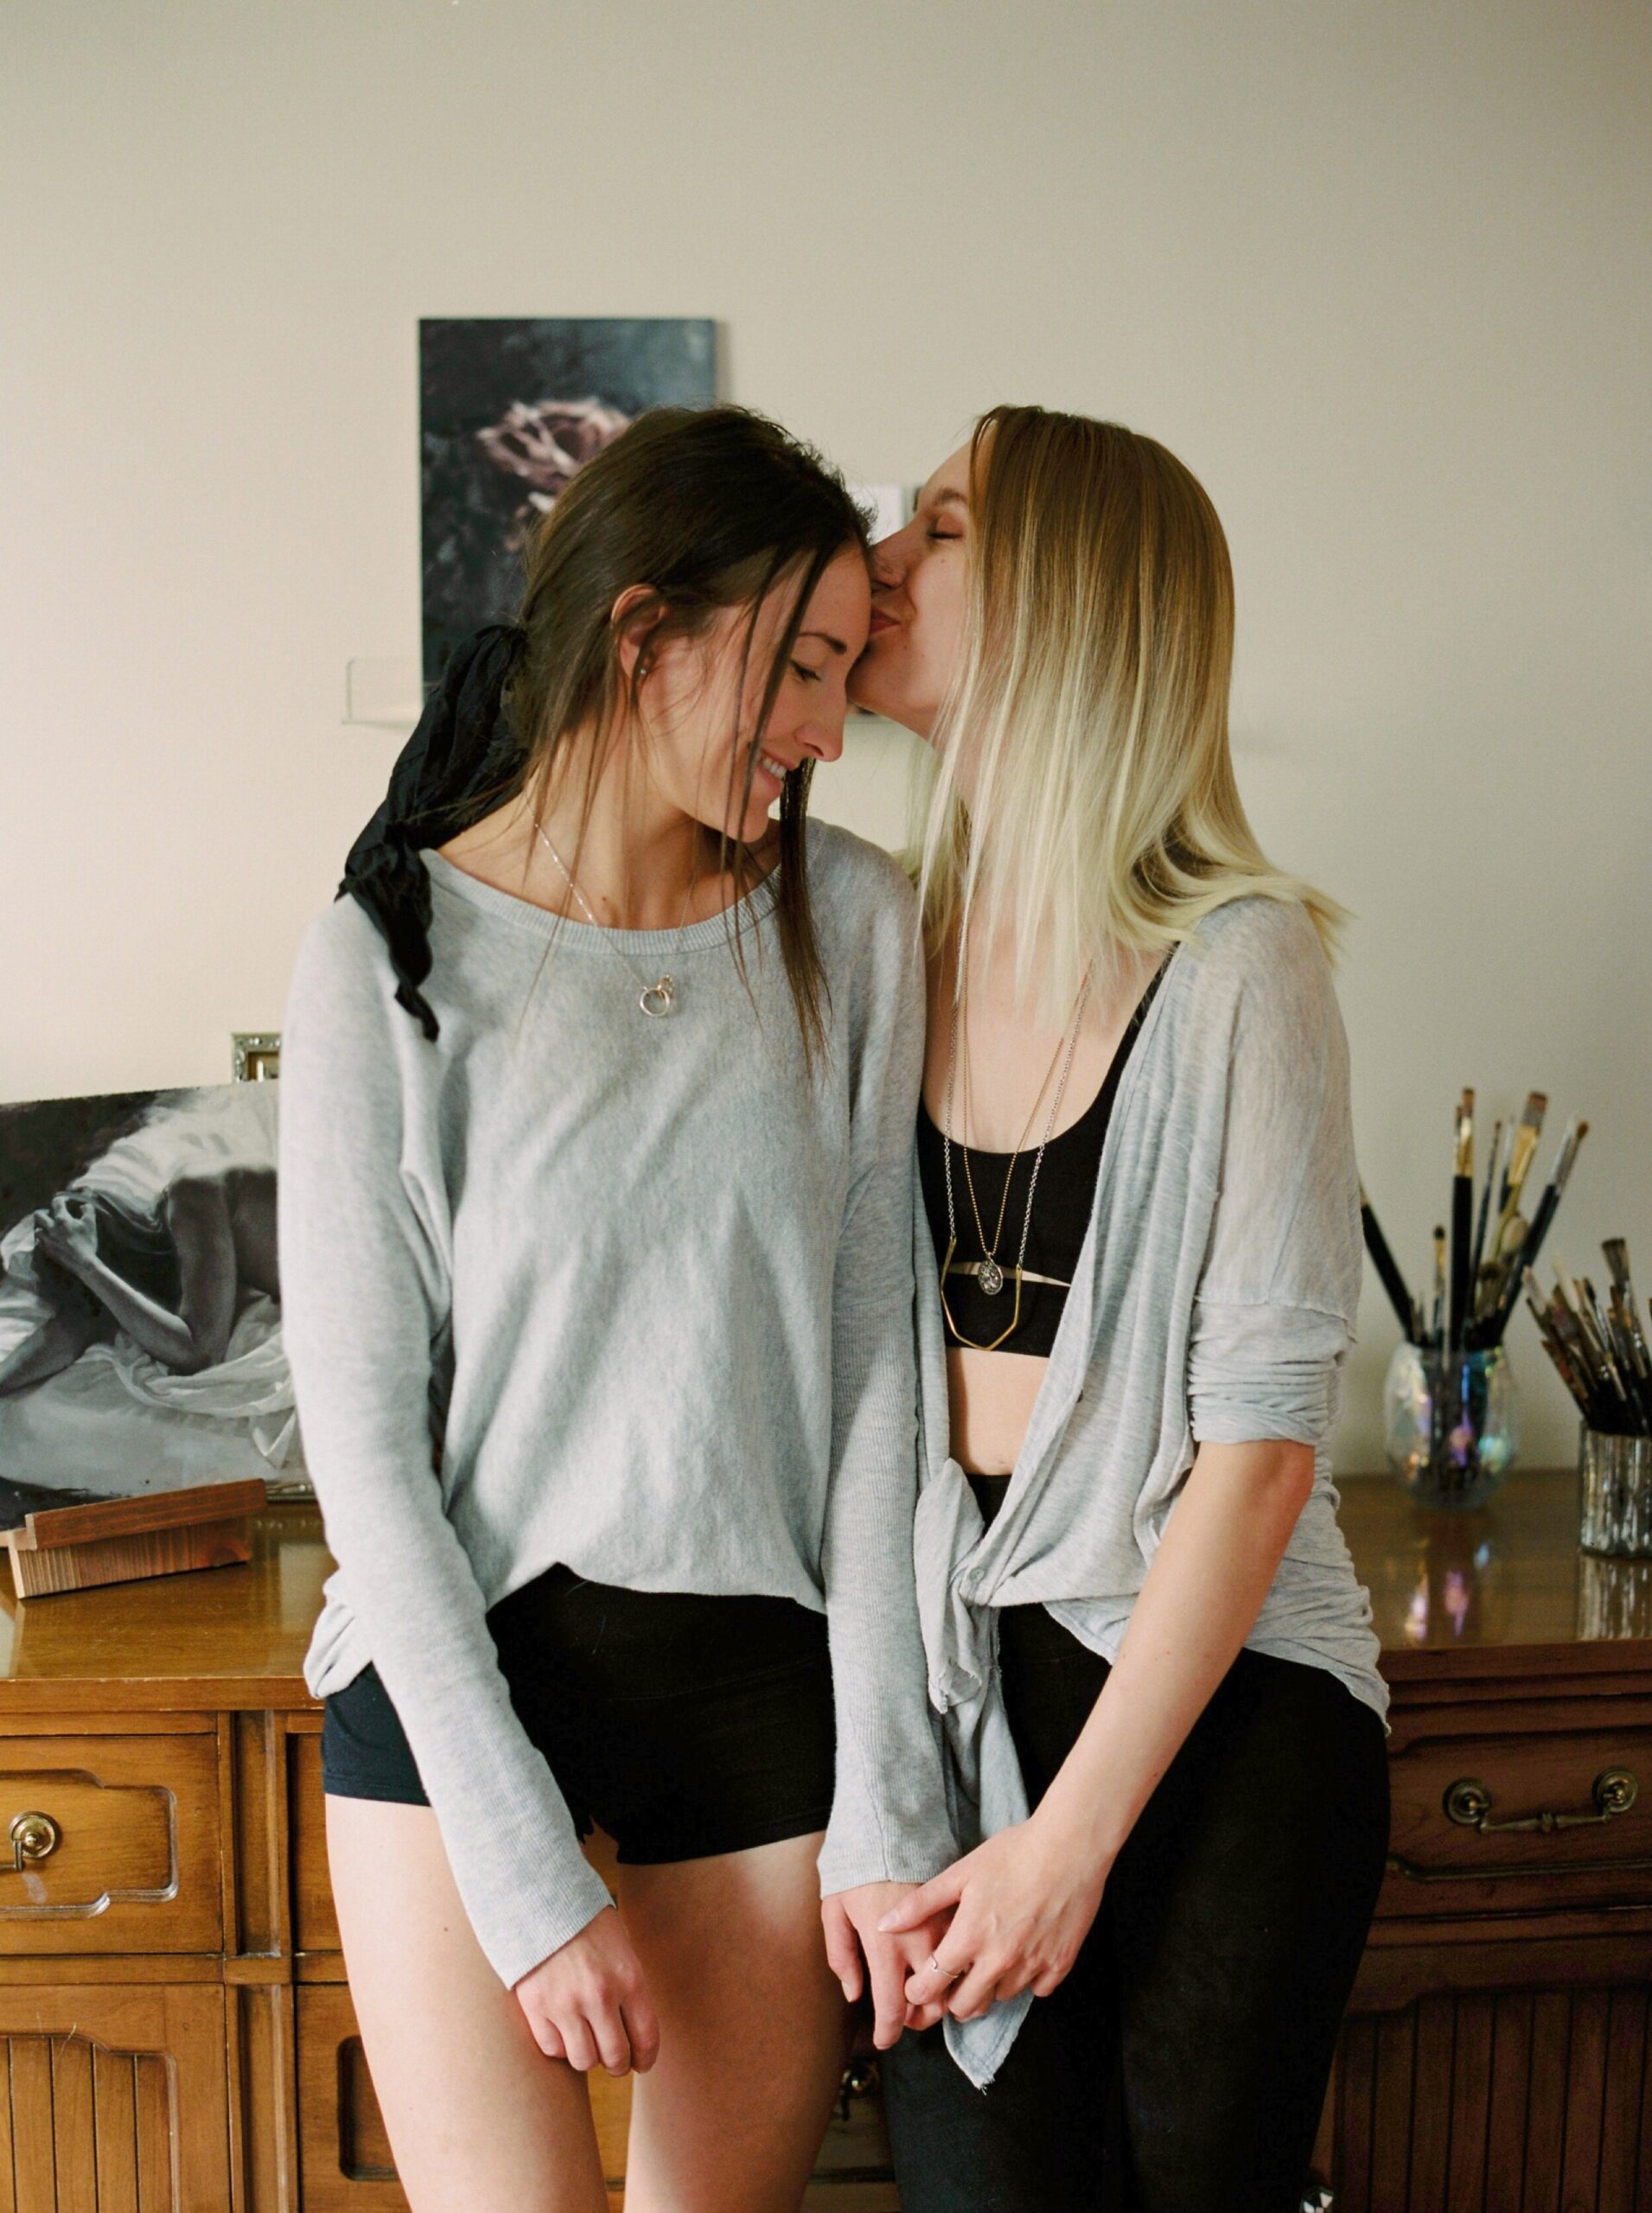  dark and moody film inspiration | same sex lesbian couple pose ideas | artists in love | lesbian in home engagement session 